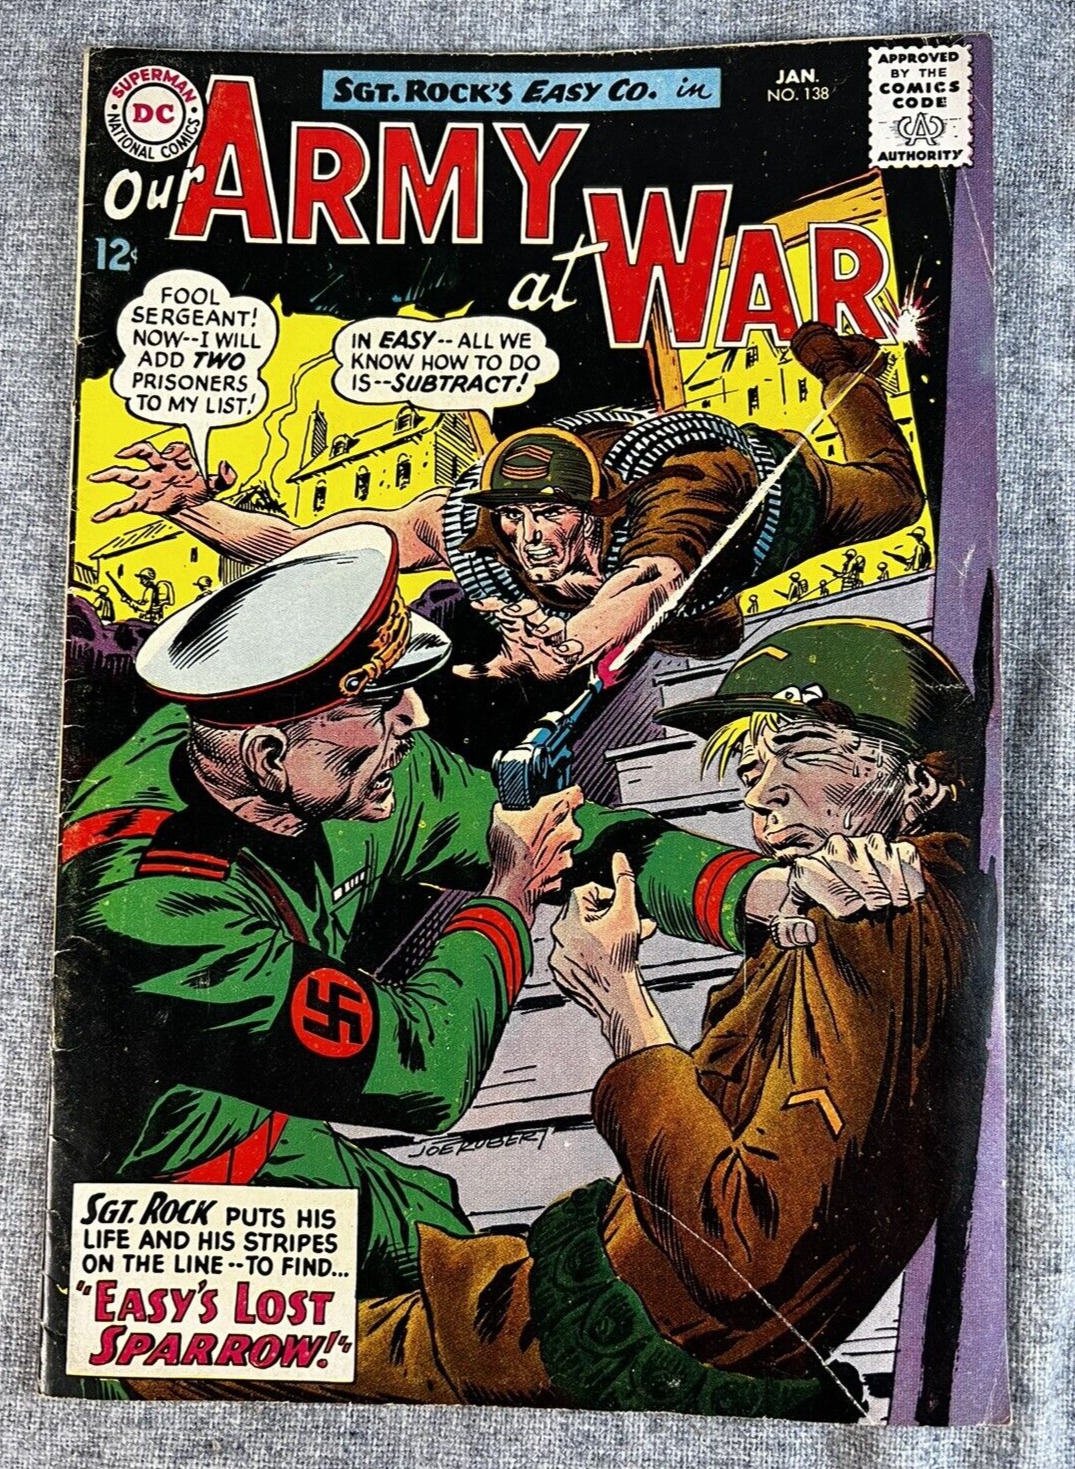 Sgt. Rock Our Army at War #138 DC Comics Easy\'s Lost Sparrow January 1964, VG